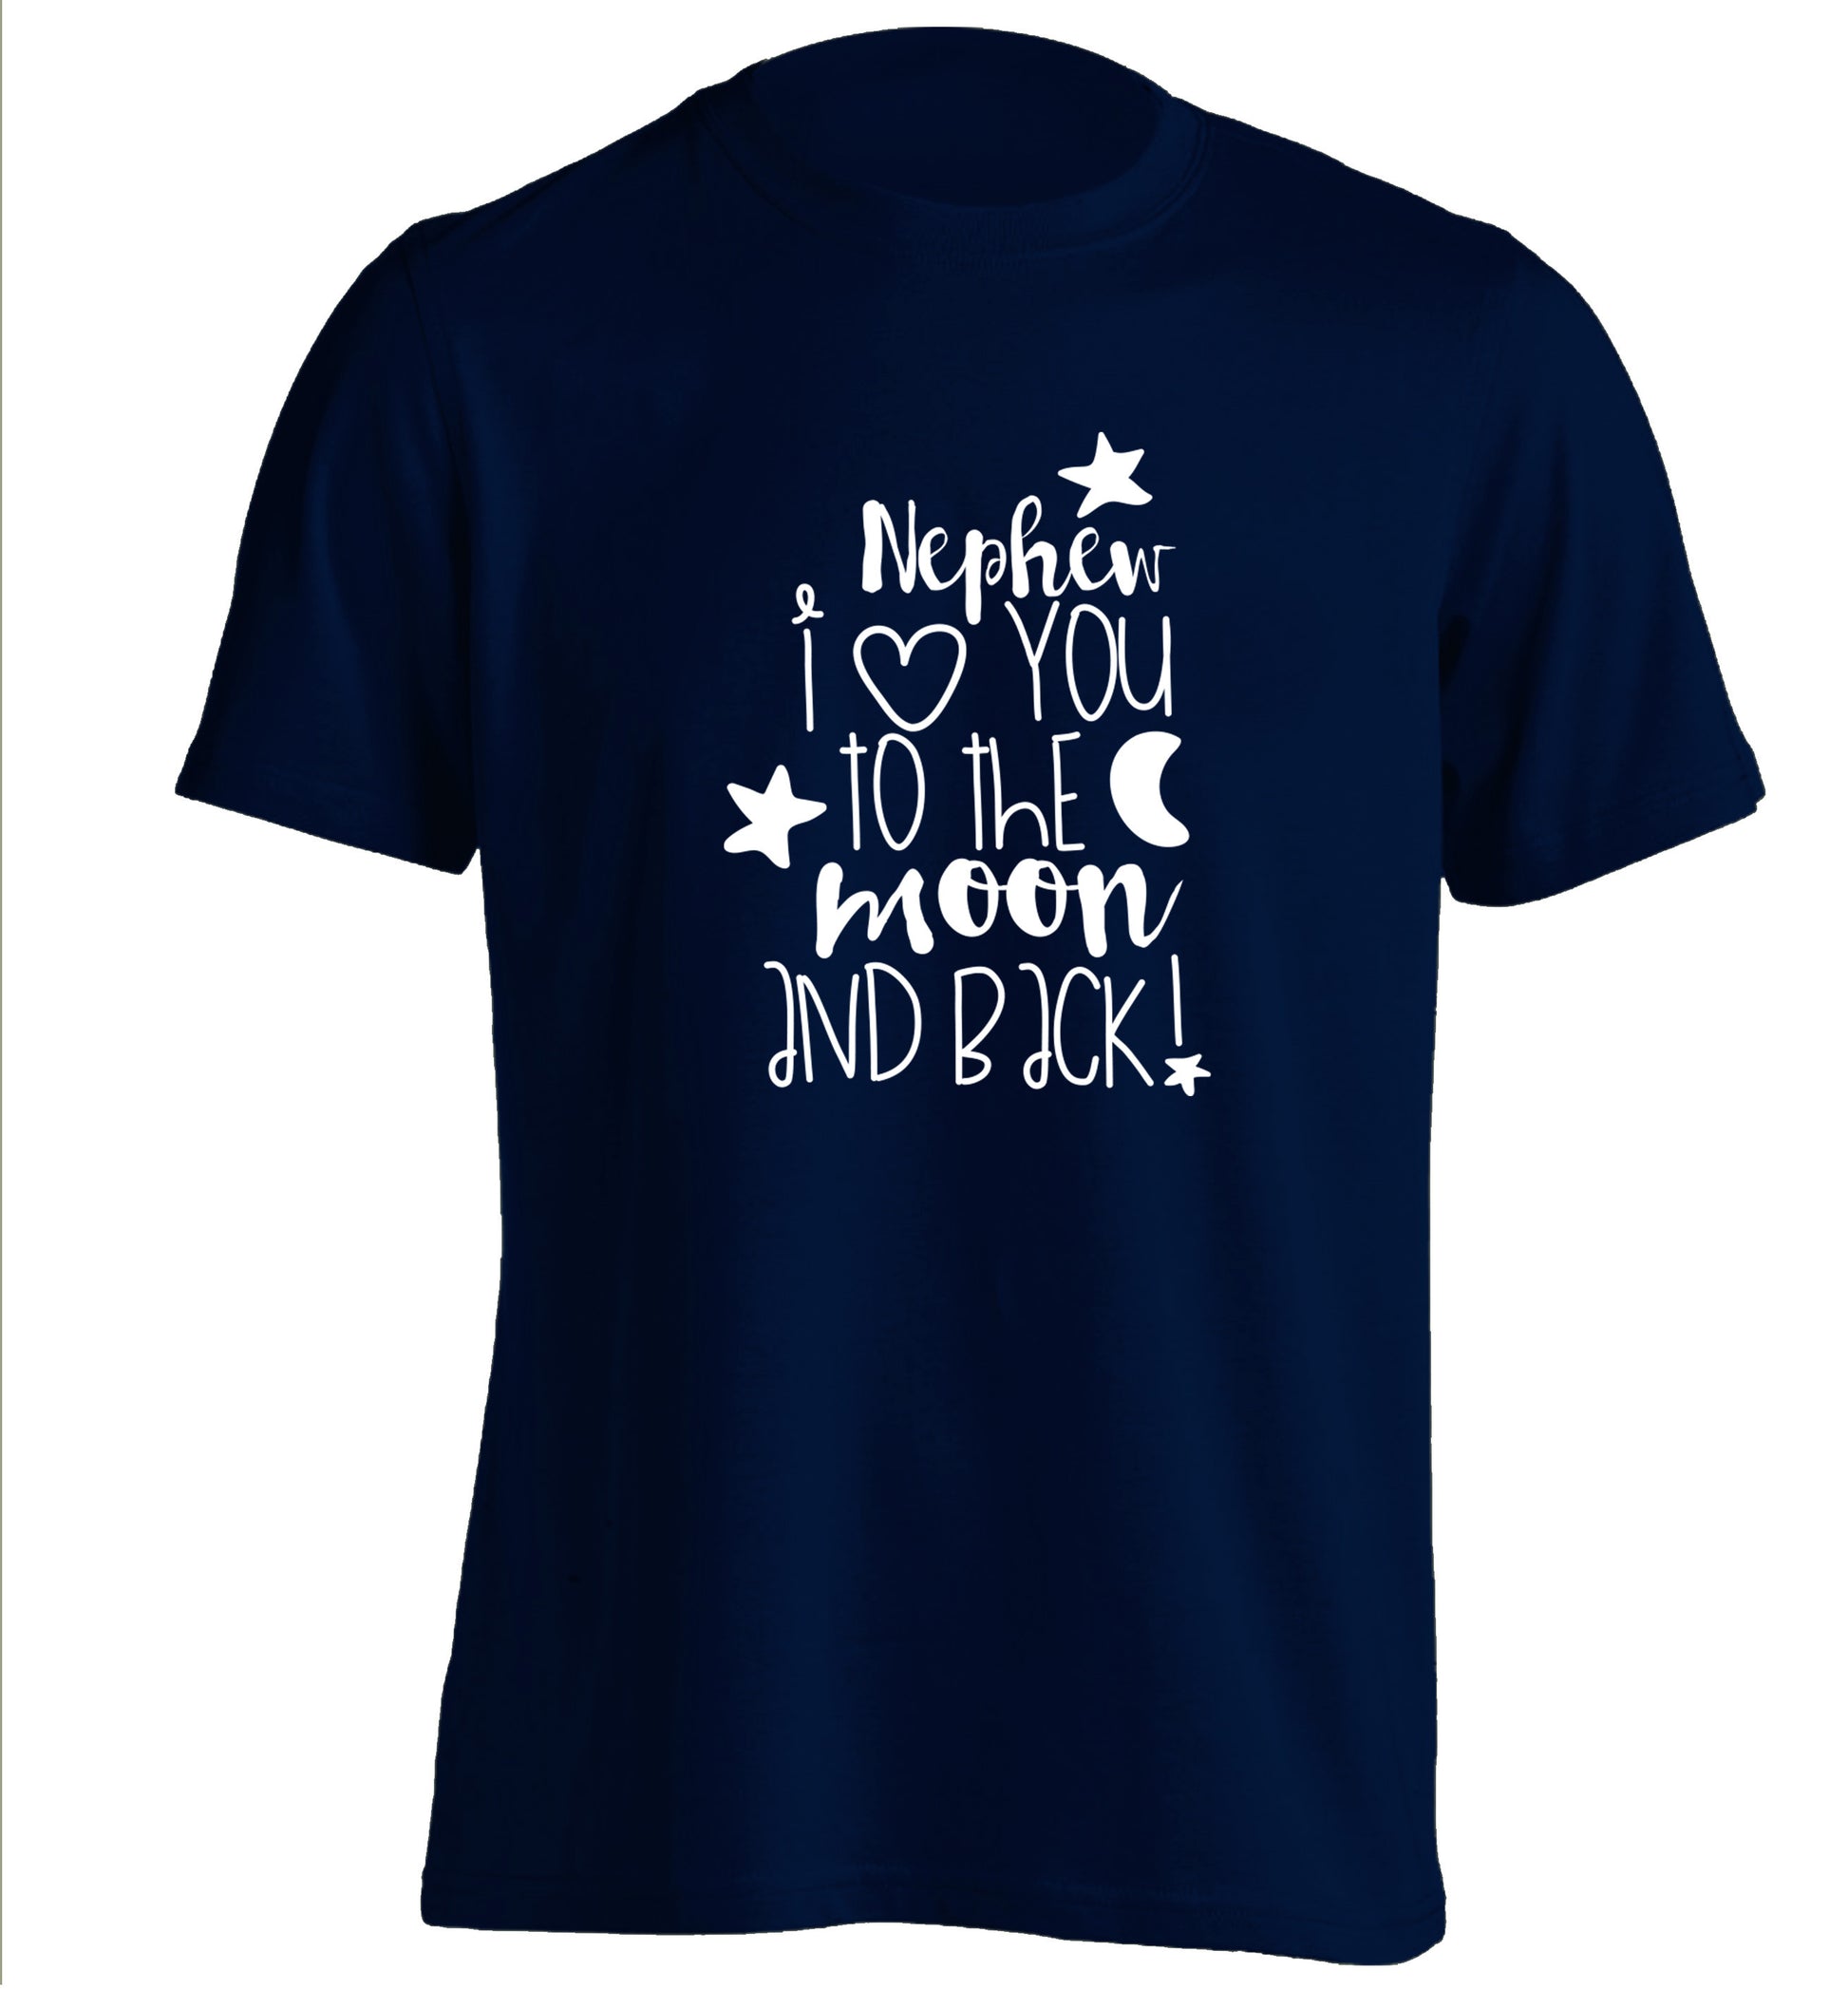 Nephew I love you to the moon and back adults unisex navy Tshirt 2XL